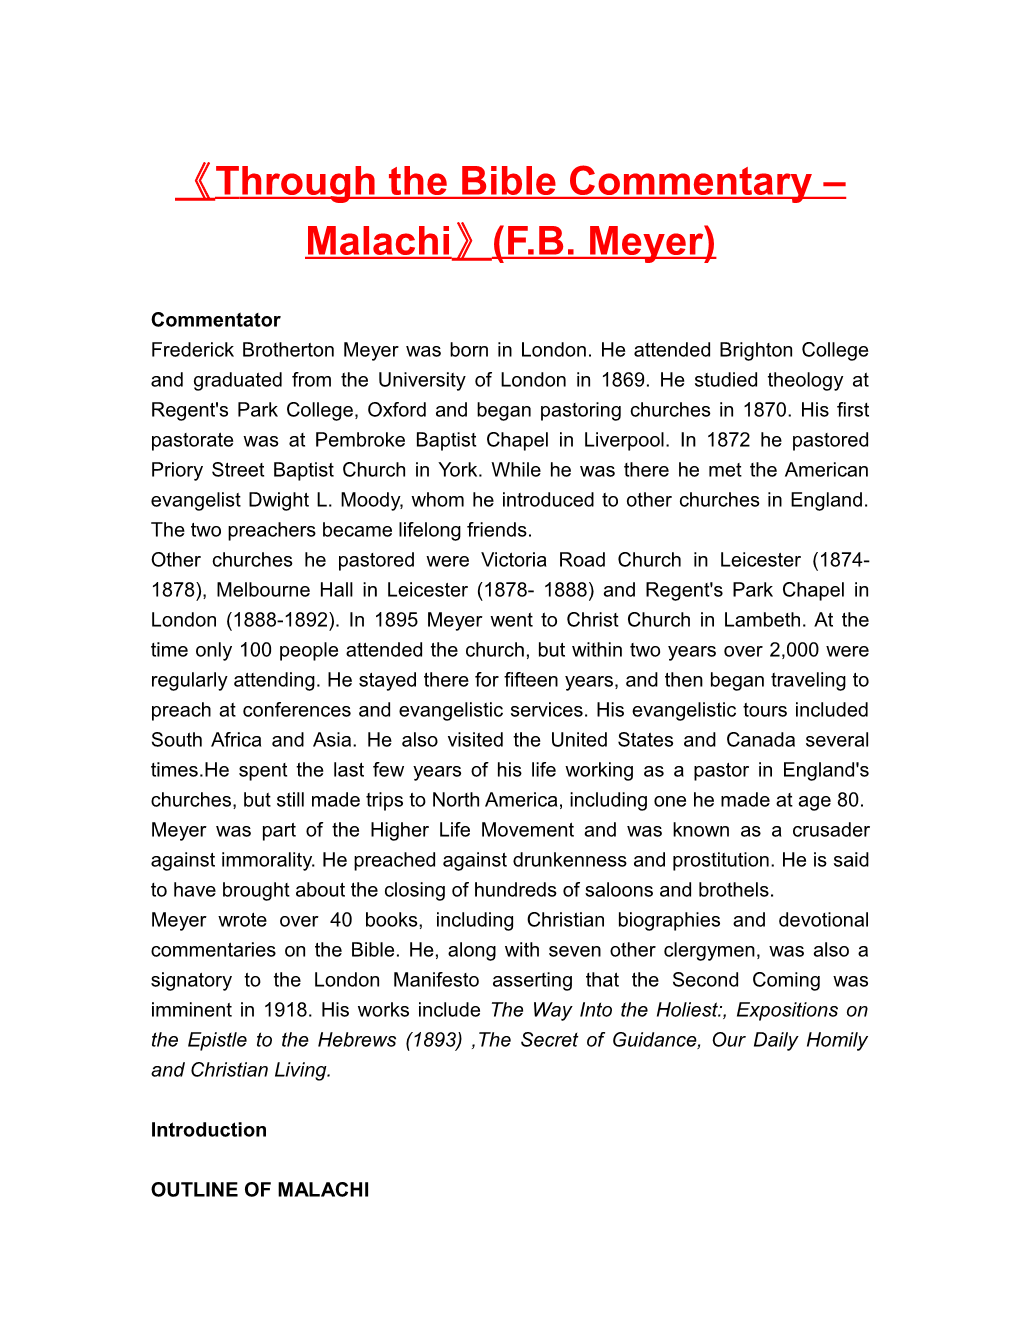 Through the Bible Commentary Malachi (F.B. Meyer)